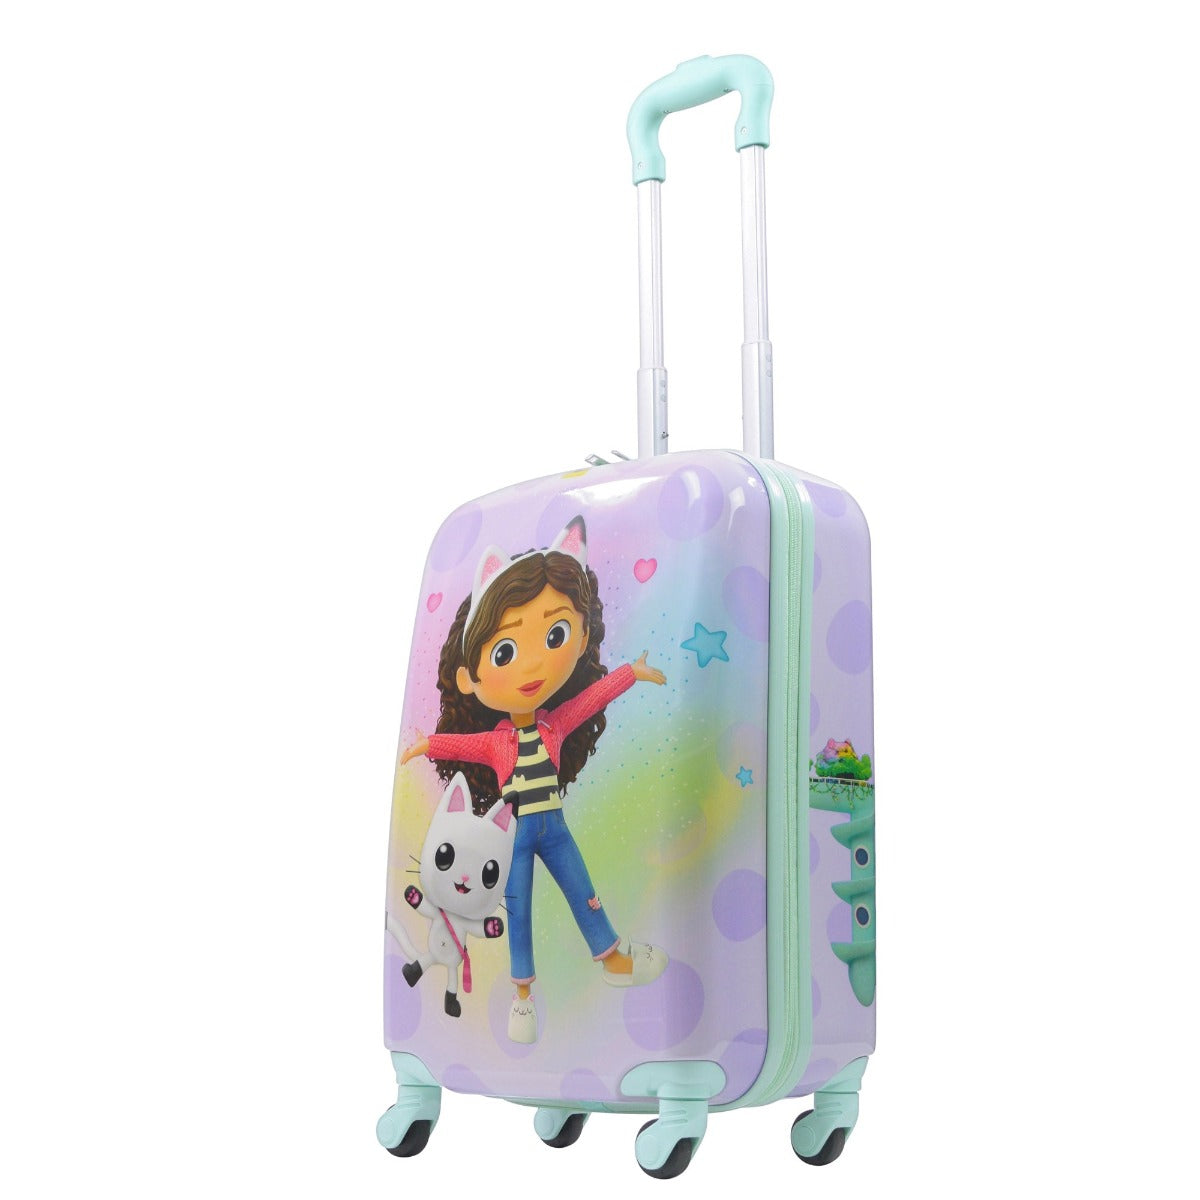 Gabby's Dollhouse 21" carry on hardside spinner suitcase - best suitcase for travelling kids